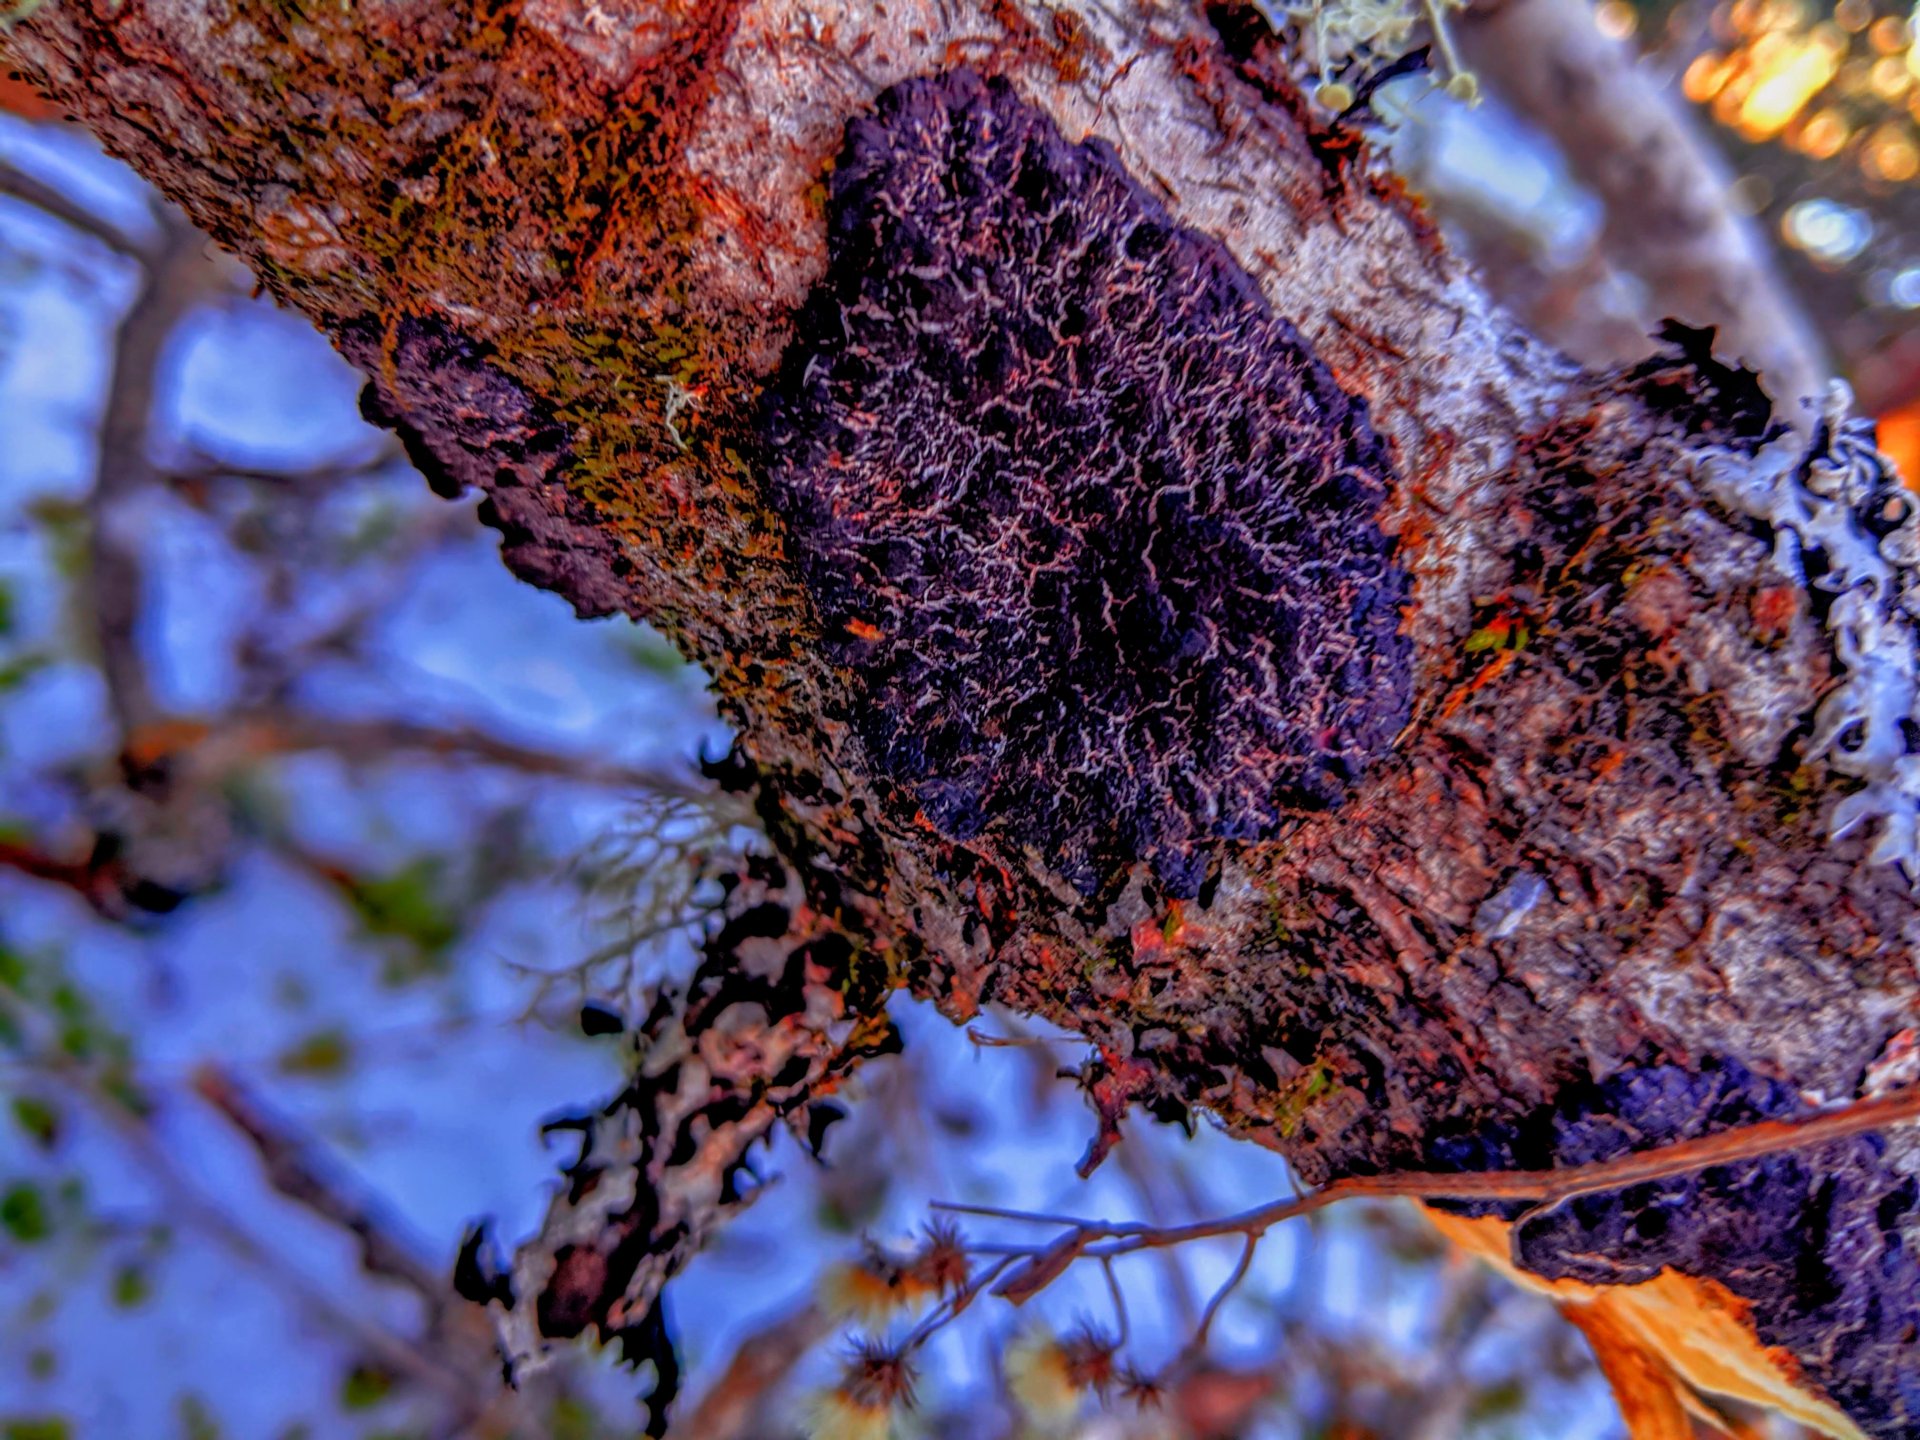 black, strange mushroom growing with a tree on it's branch in Perry, Maine.